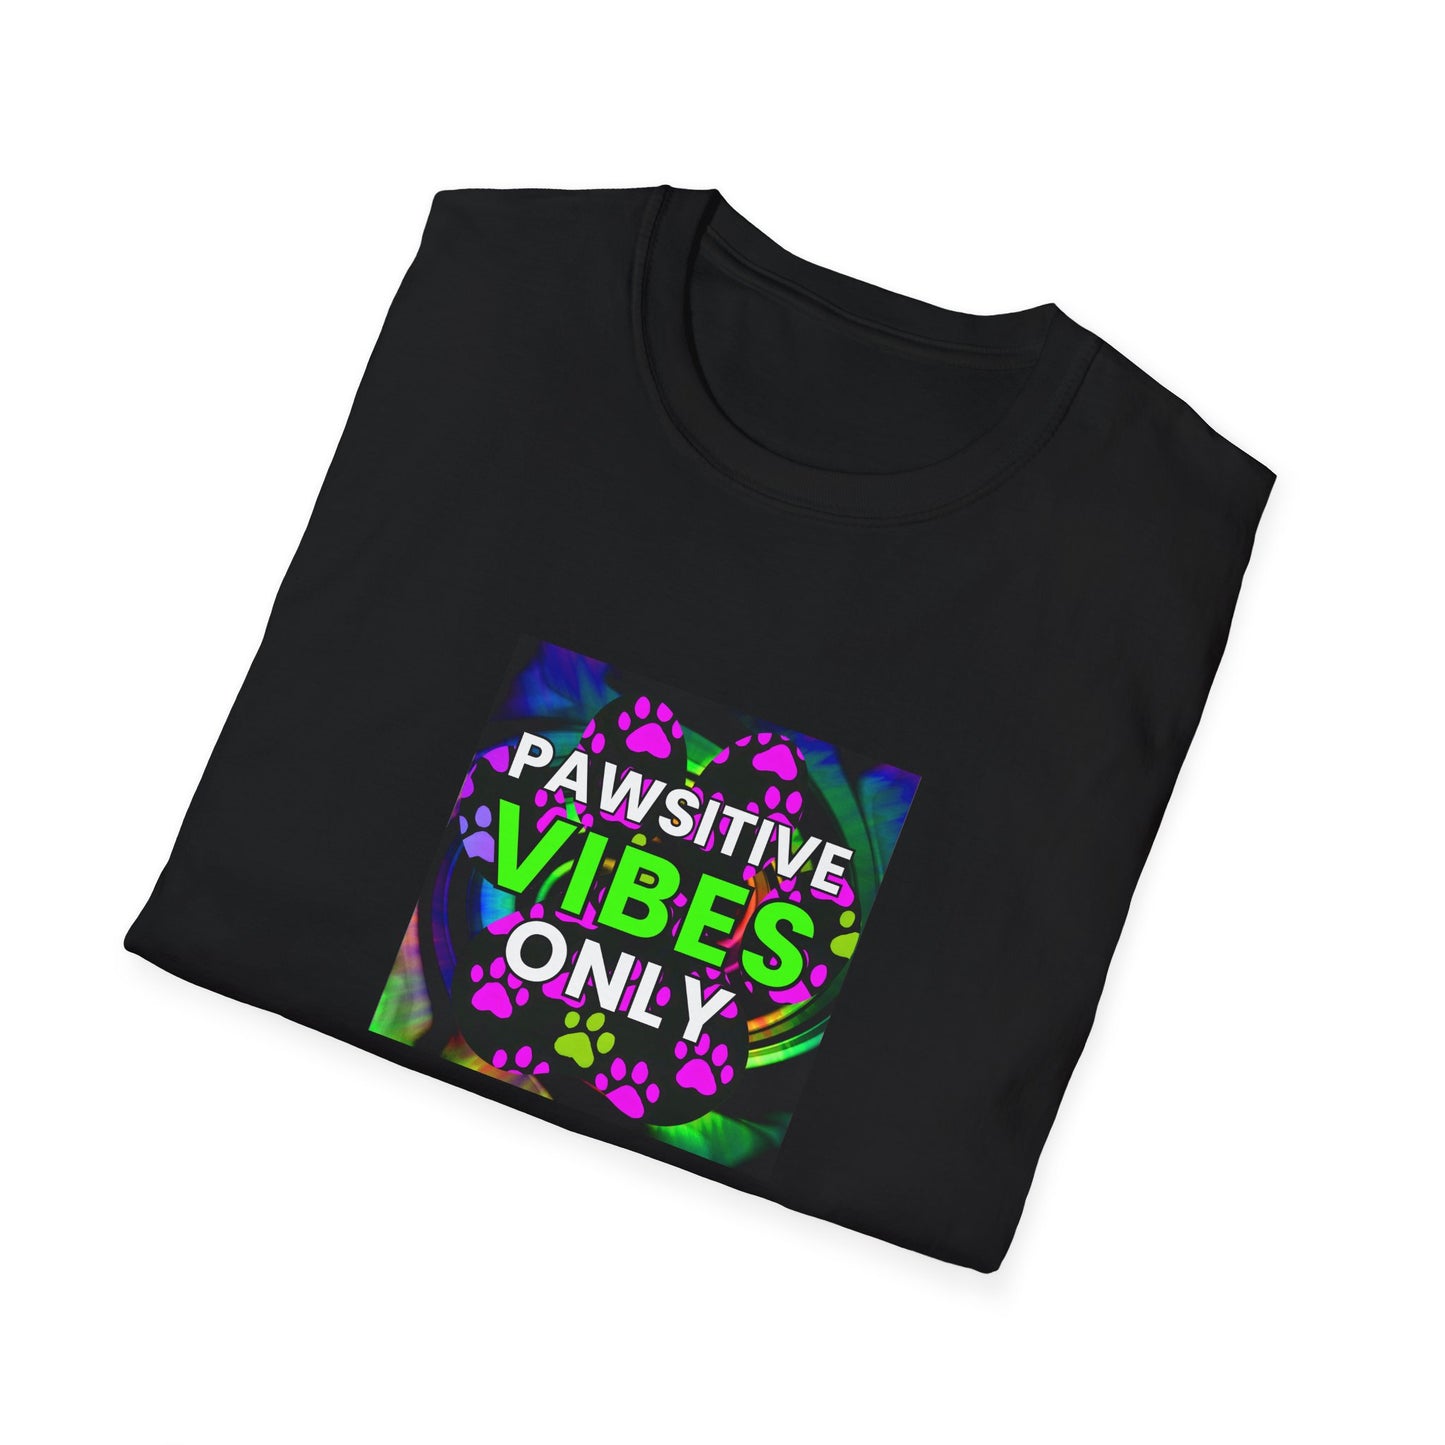 Motivational Morty - "Pawsitive Vibes Only" Unisex Tee